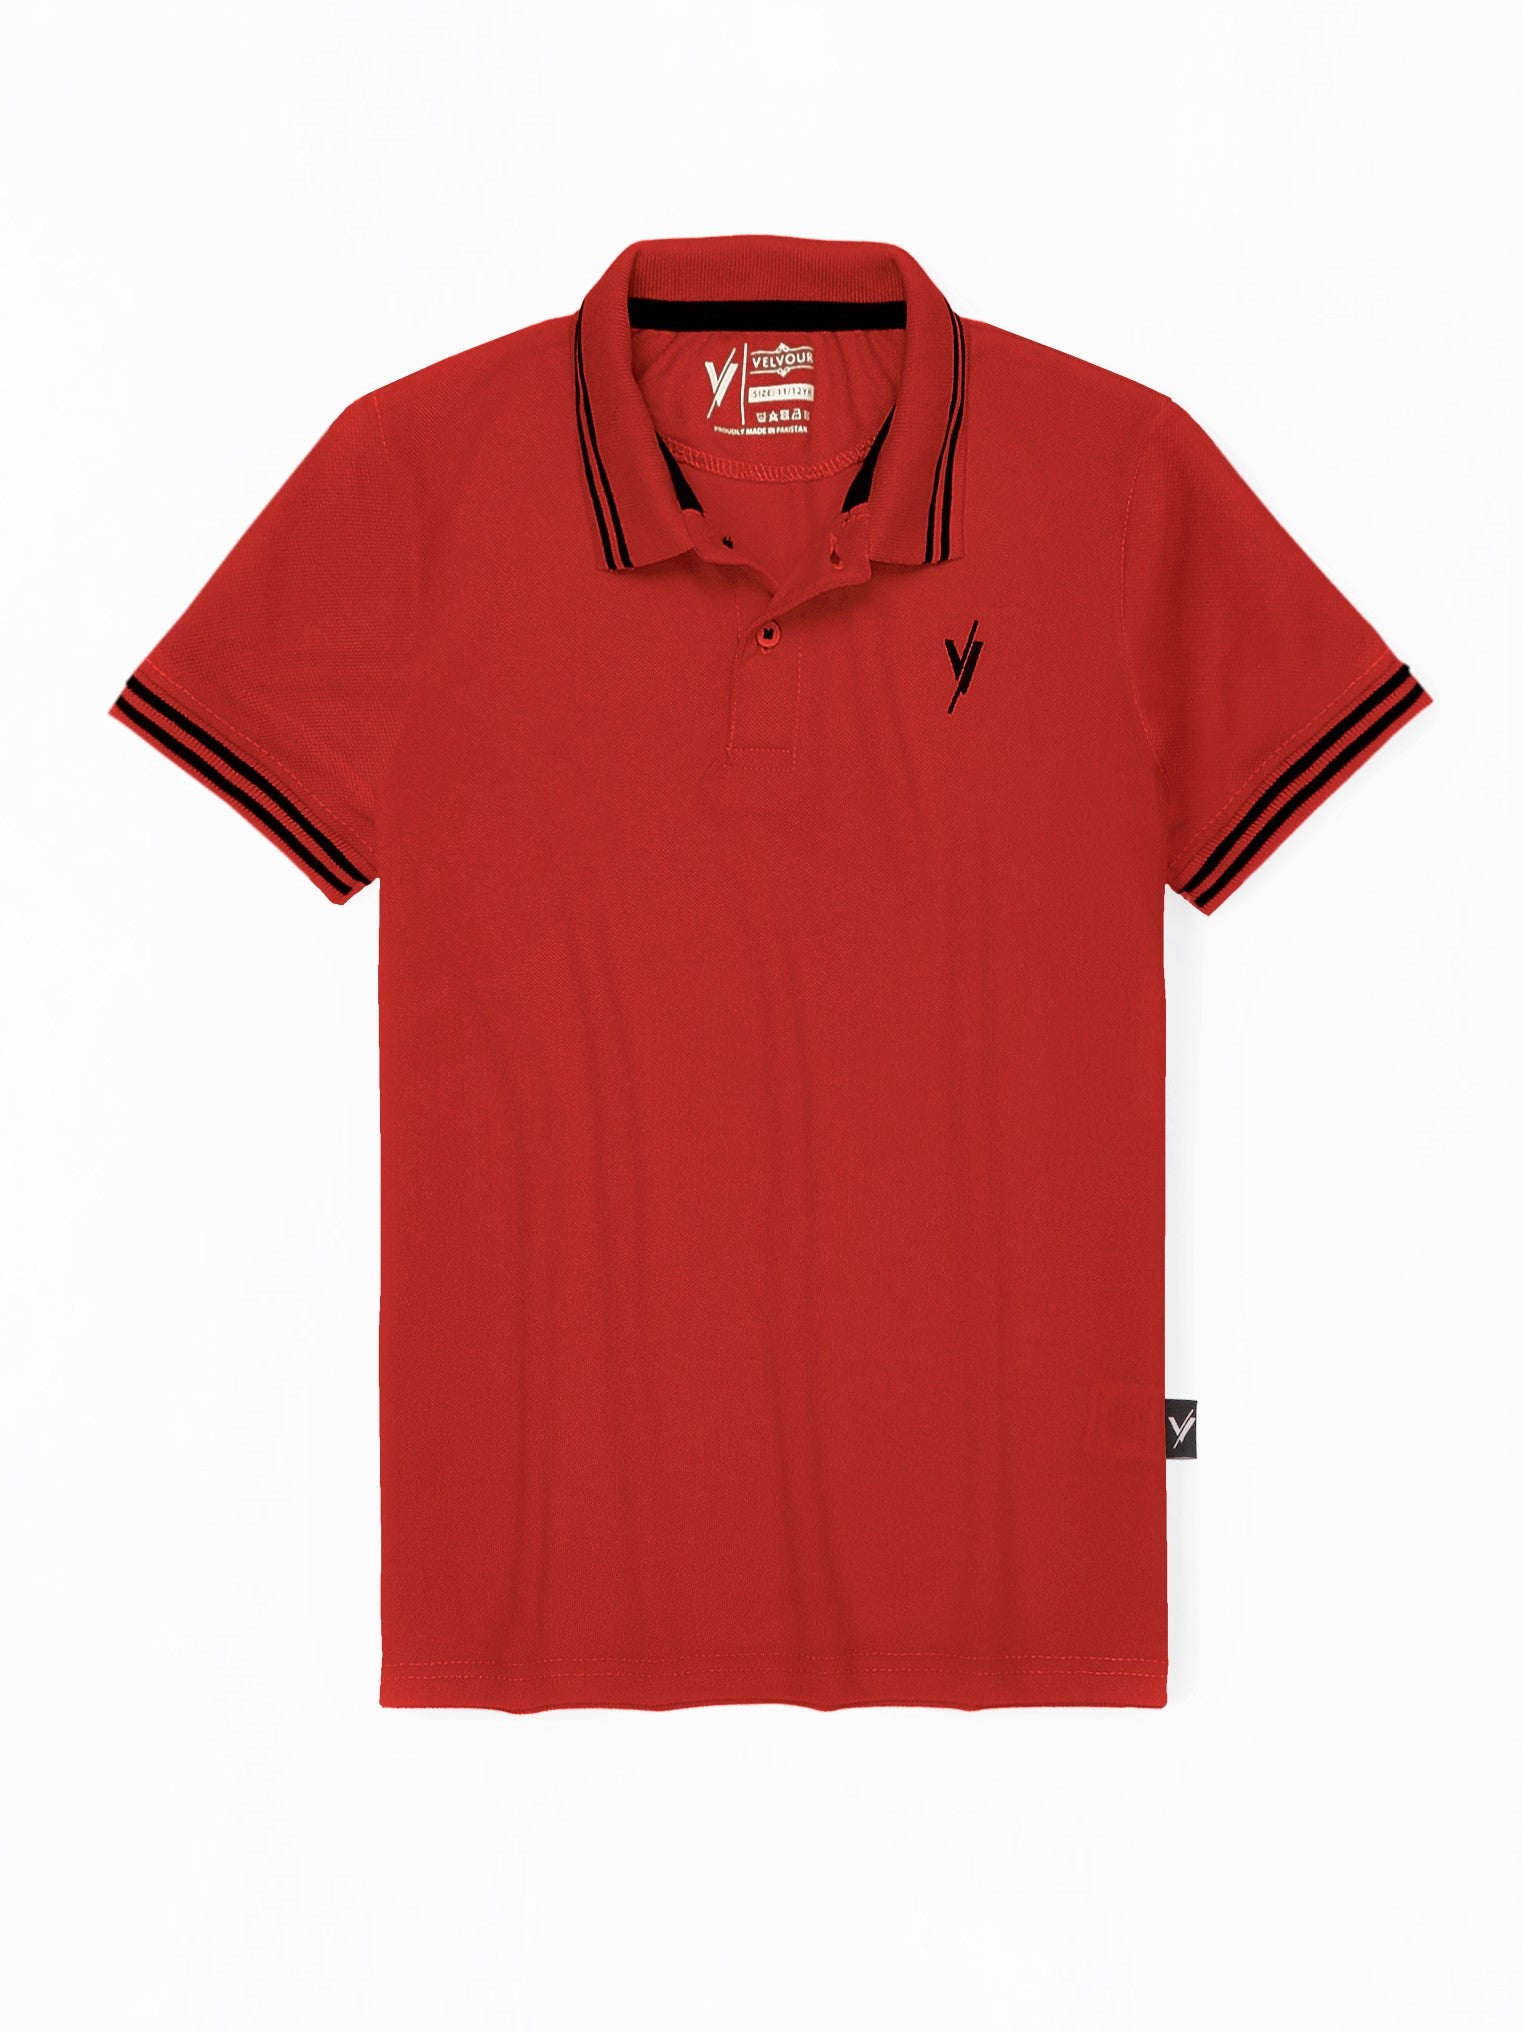 Tipping Collar Polo Shirt For Boys Plain Red